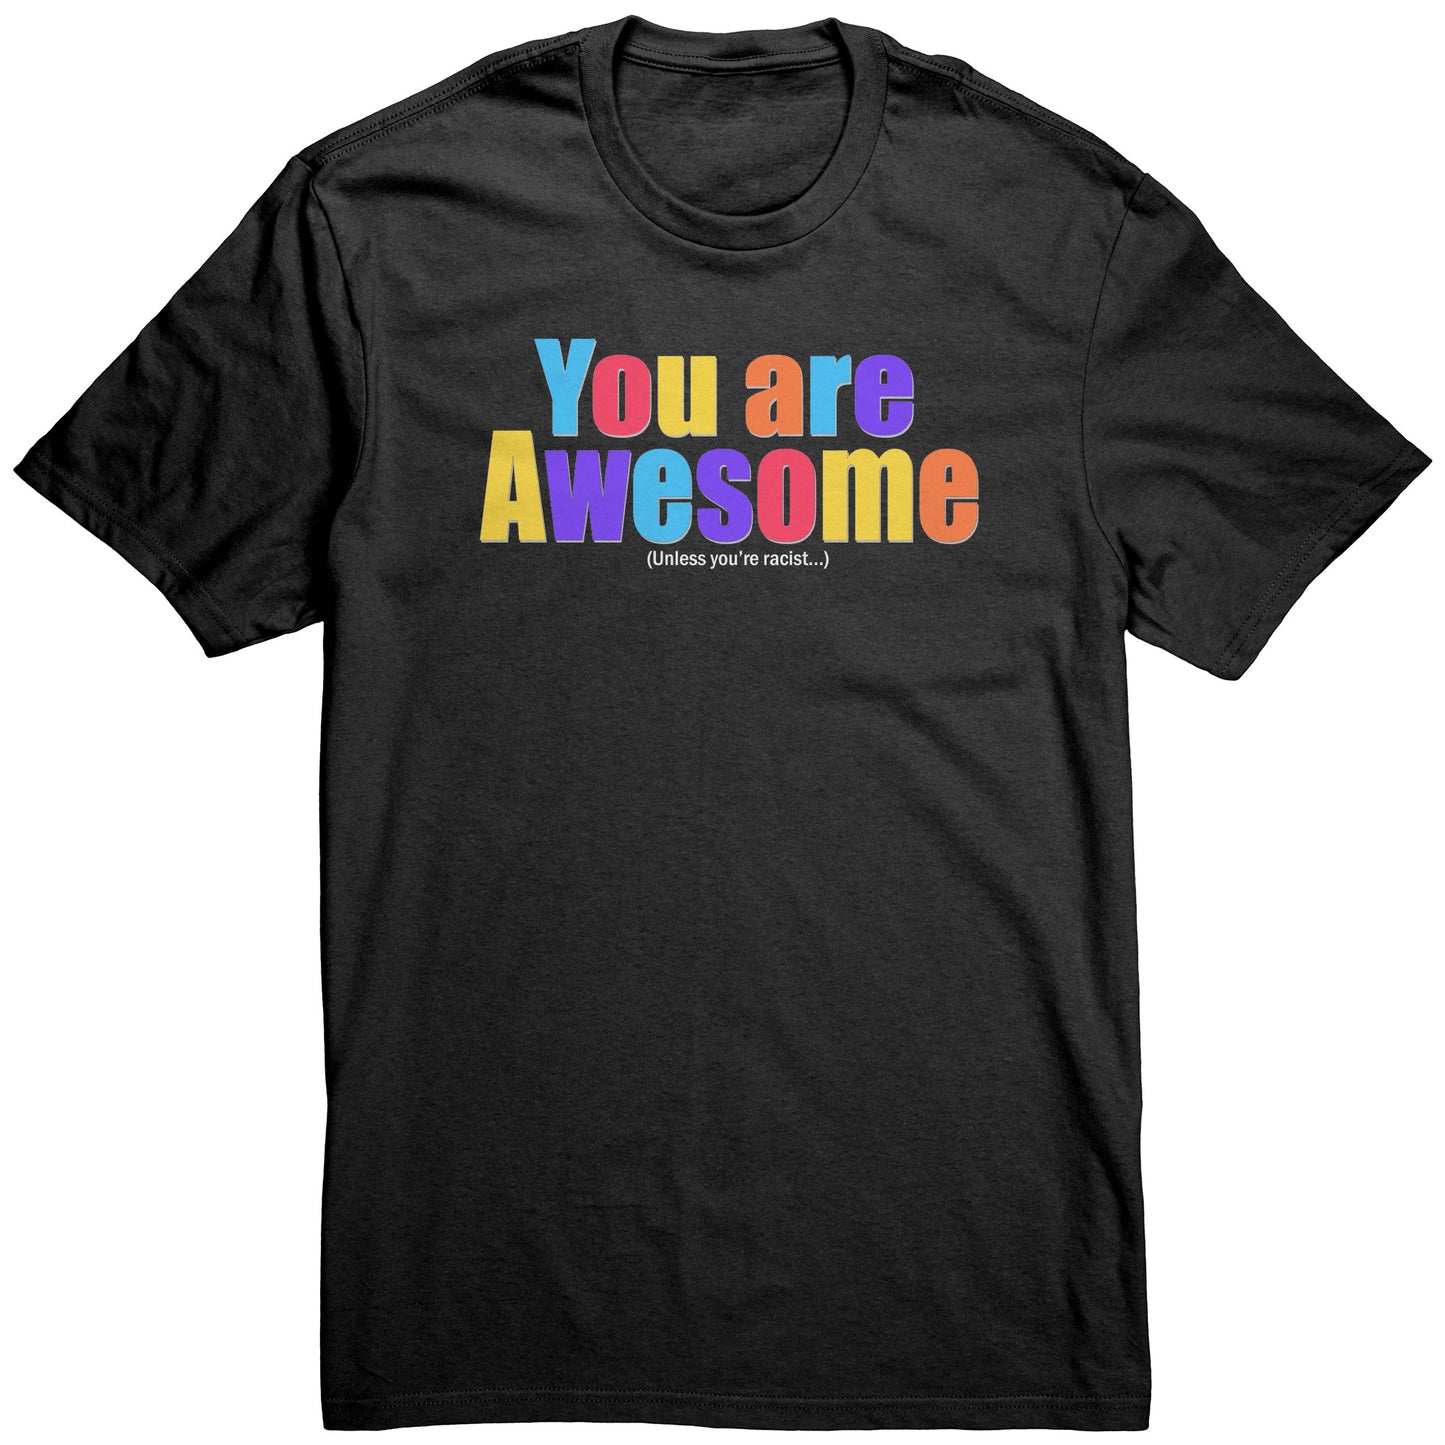 Adult Tee "You Are Awesome Unless" (white print)